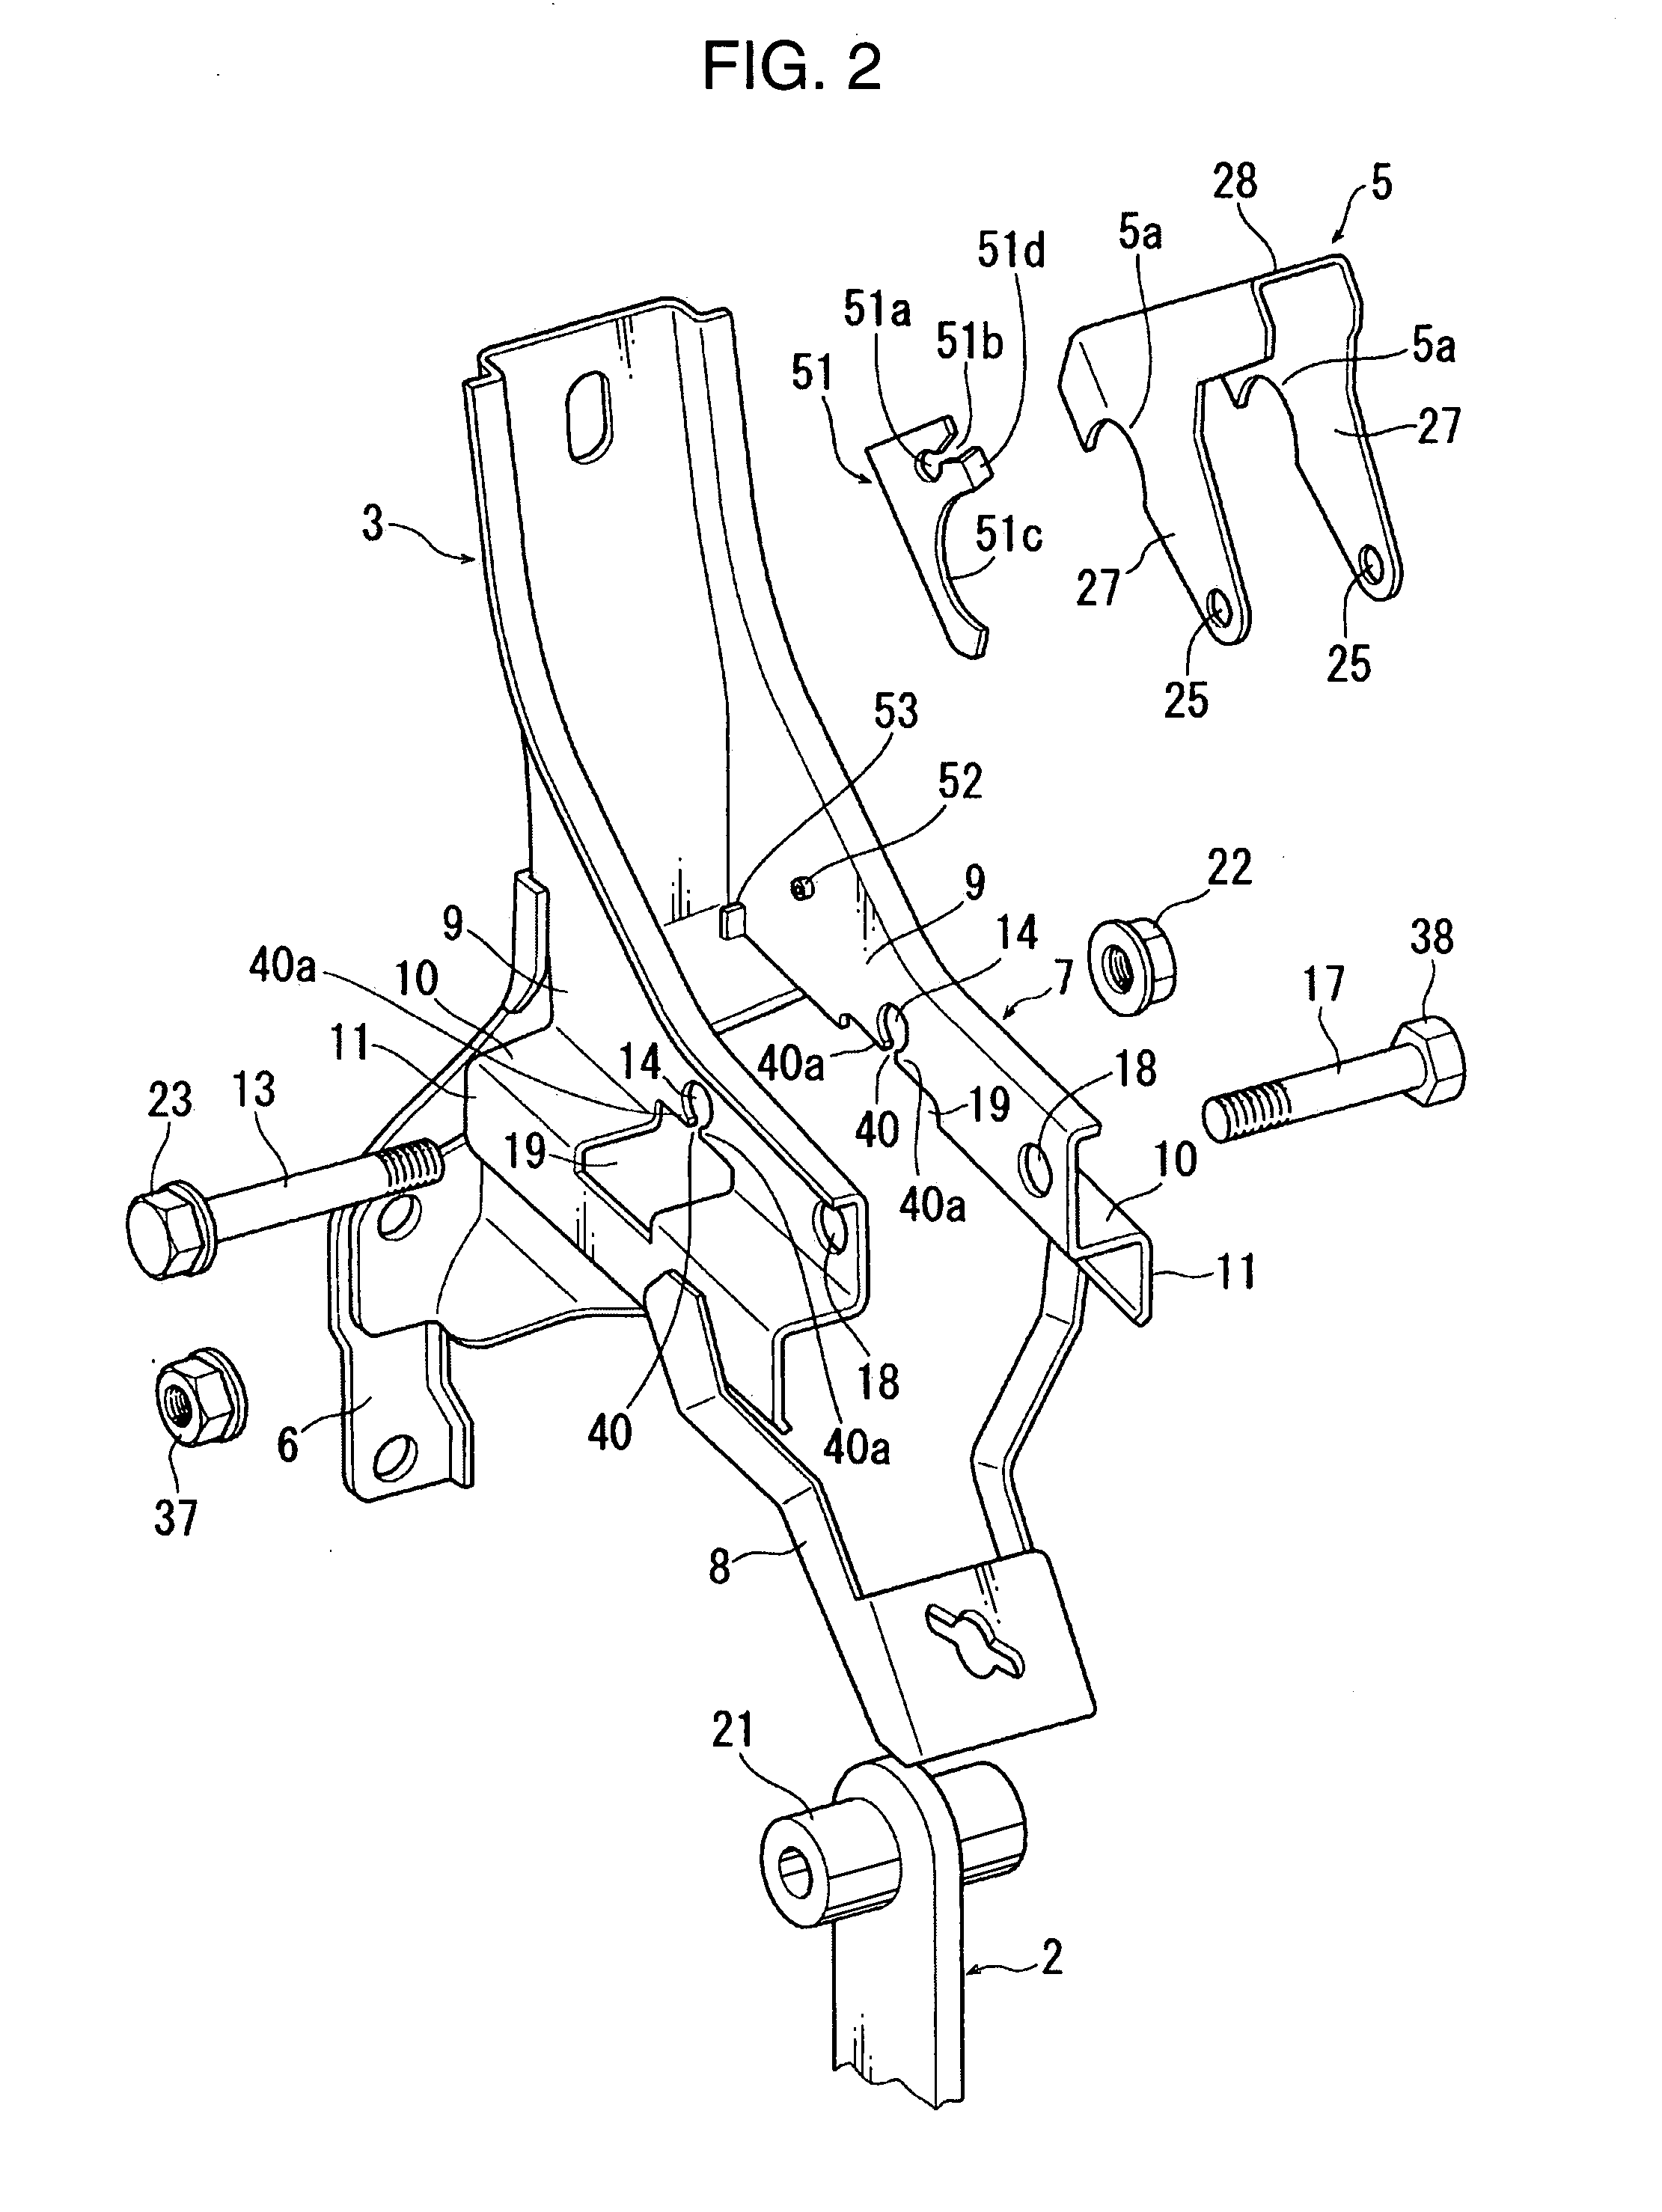 Operating pedal support structure